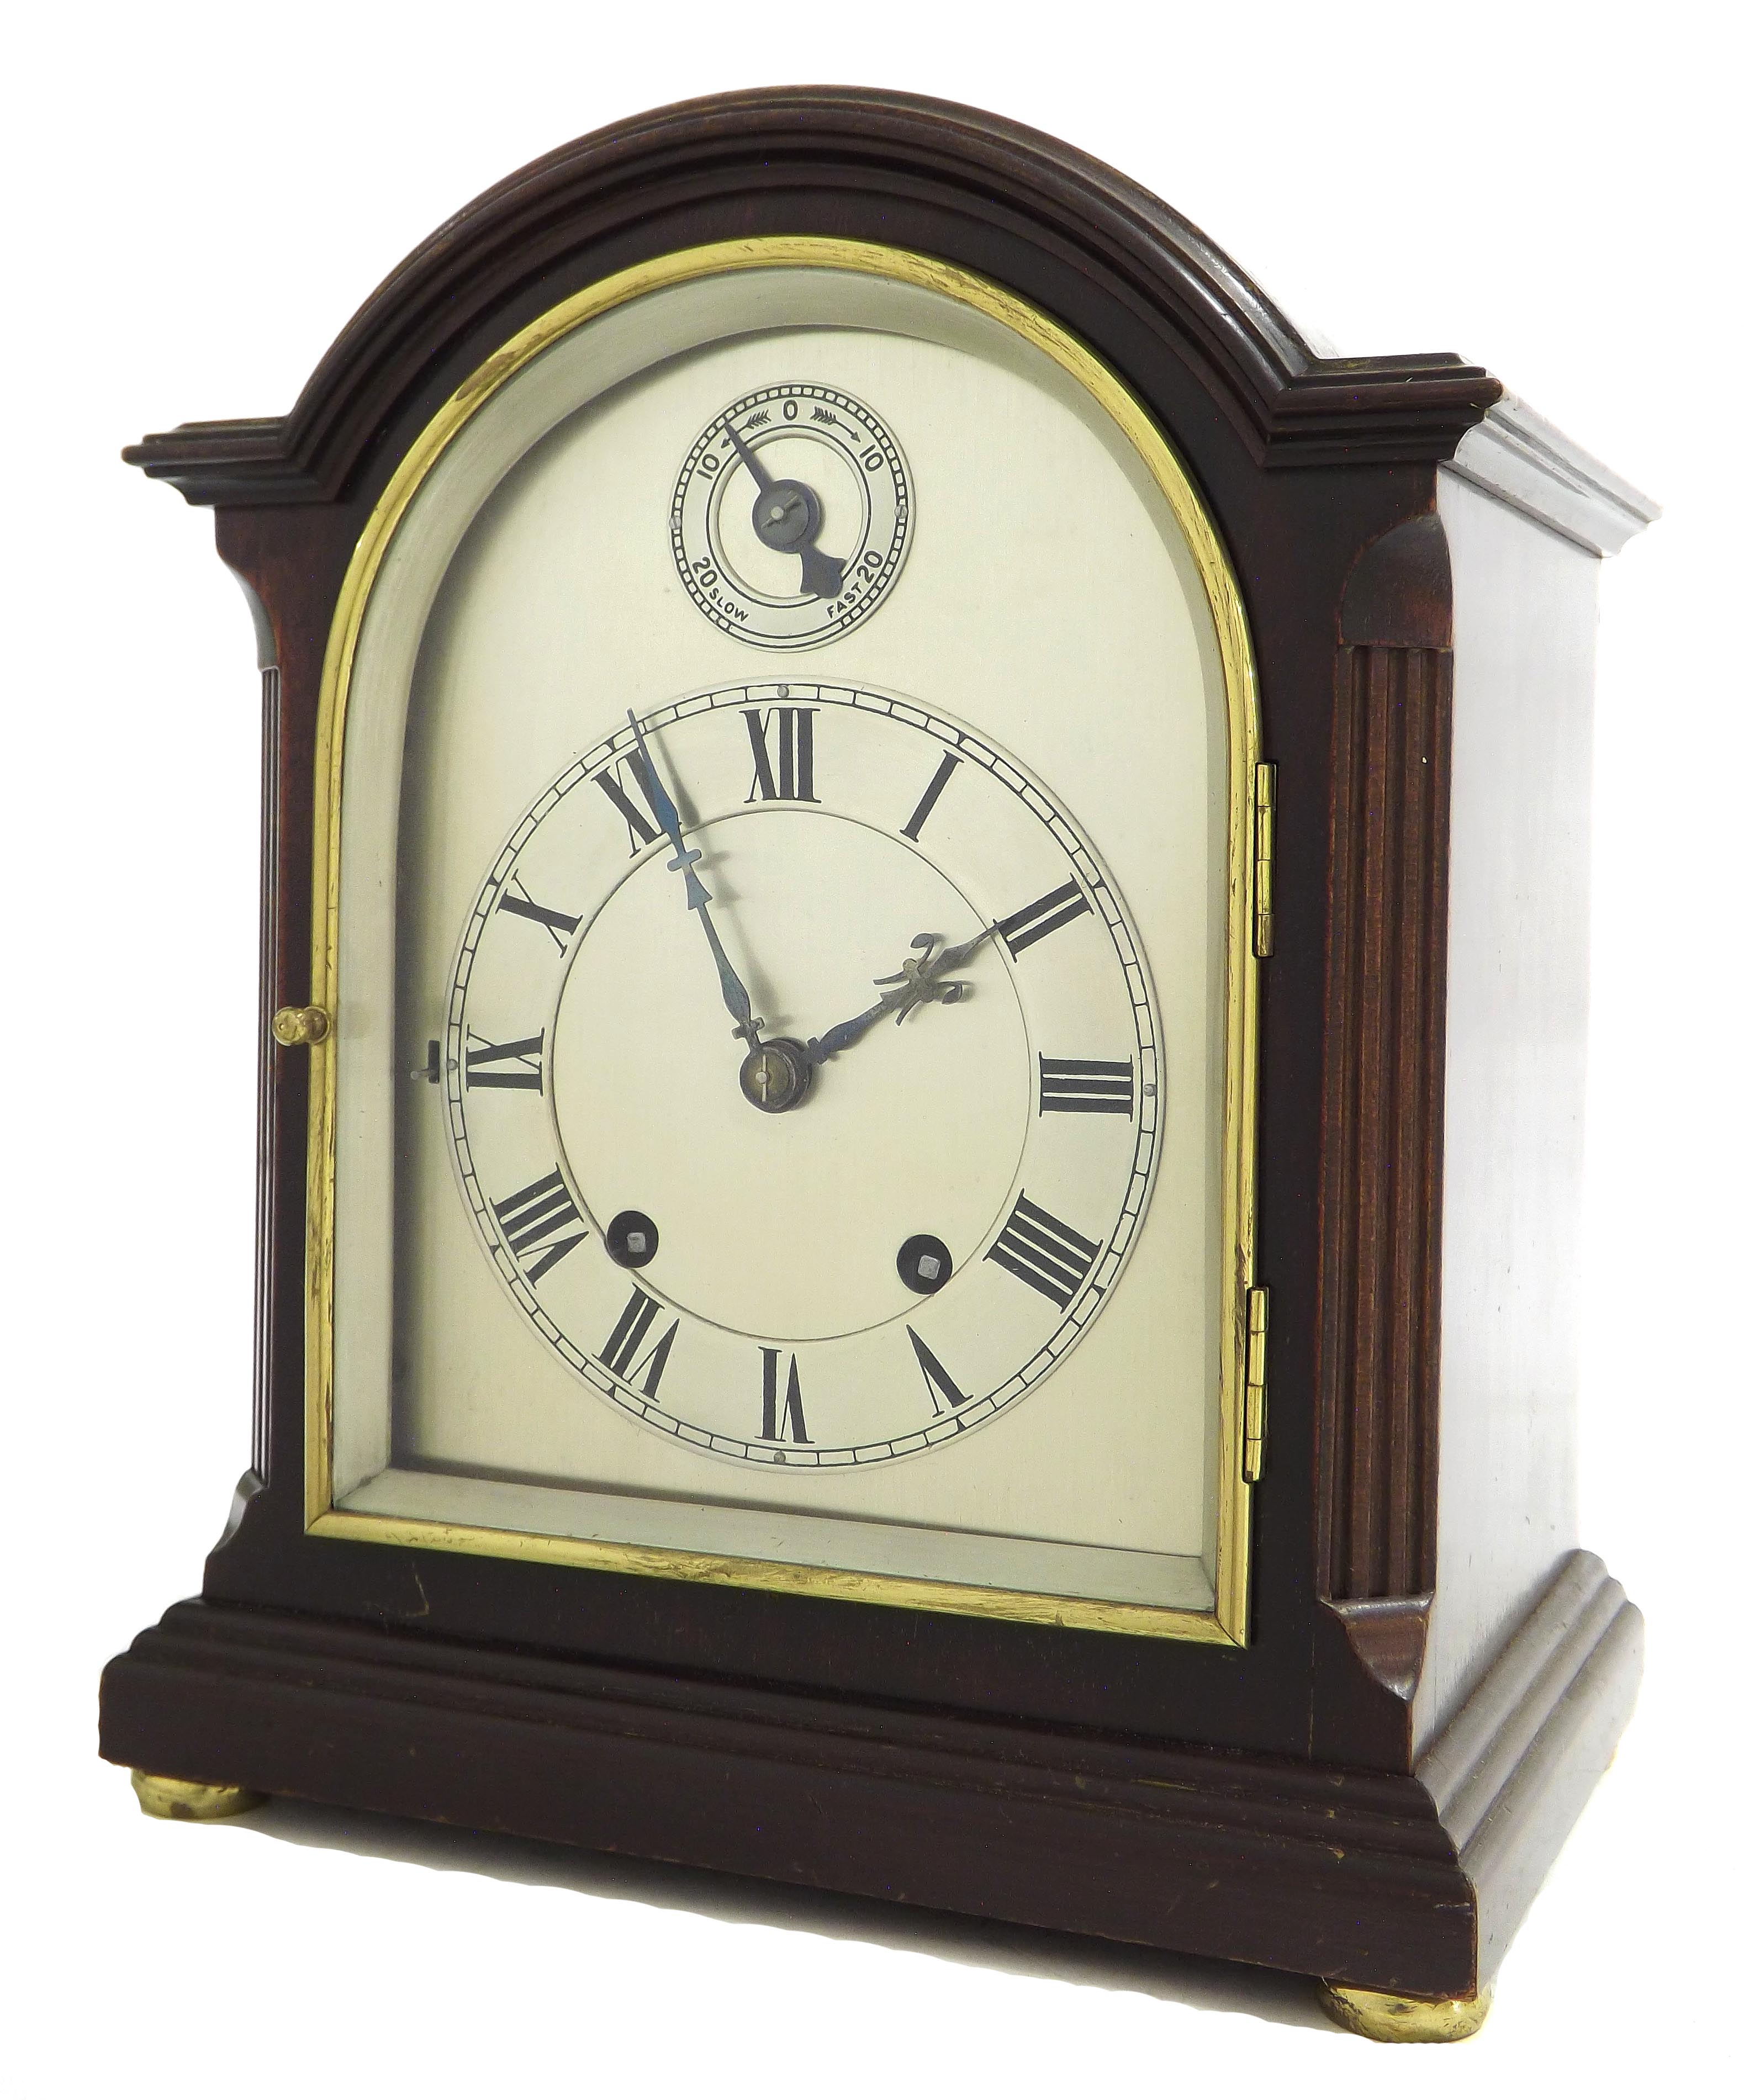 Mahogany two train mantel clock, the movement playing and striking on five gongs, the 5.5"